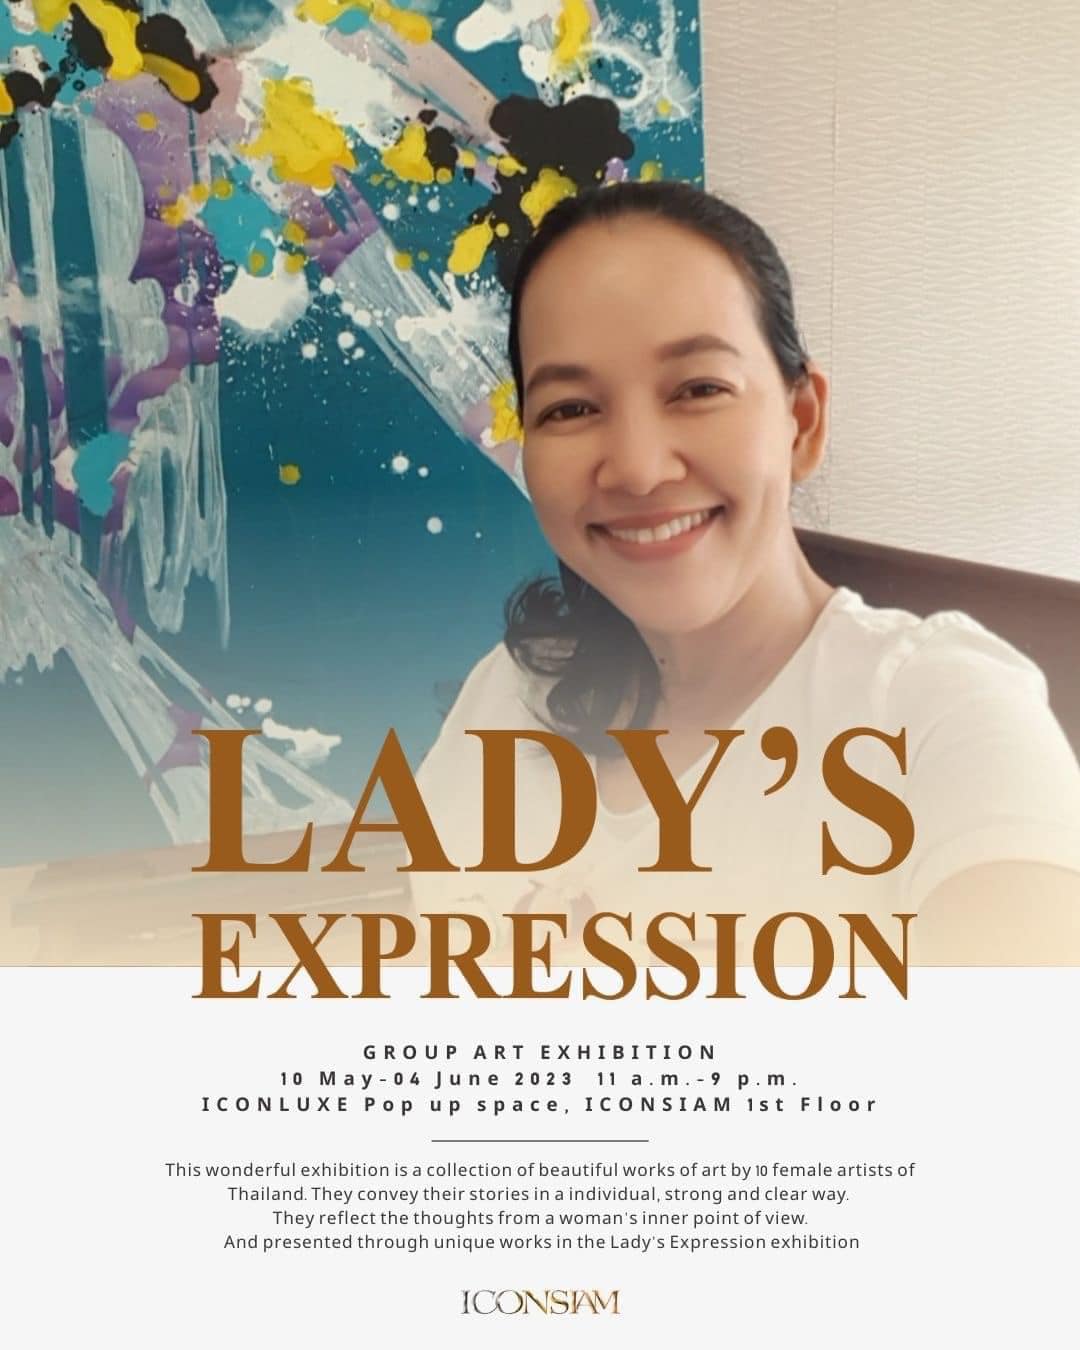 Group Art Exhibition “Lady’s Expression” in Bangkok, Thailand